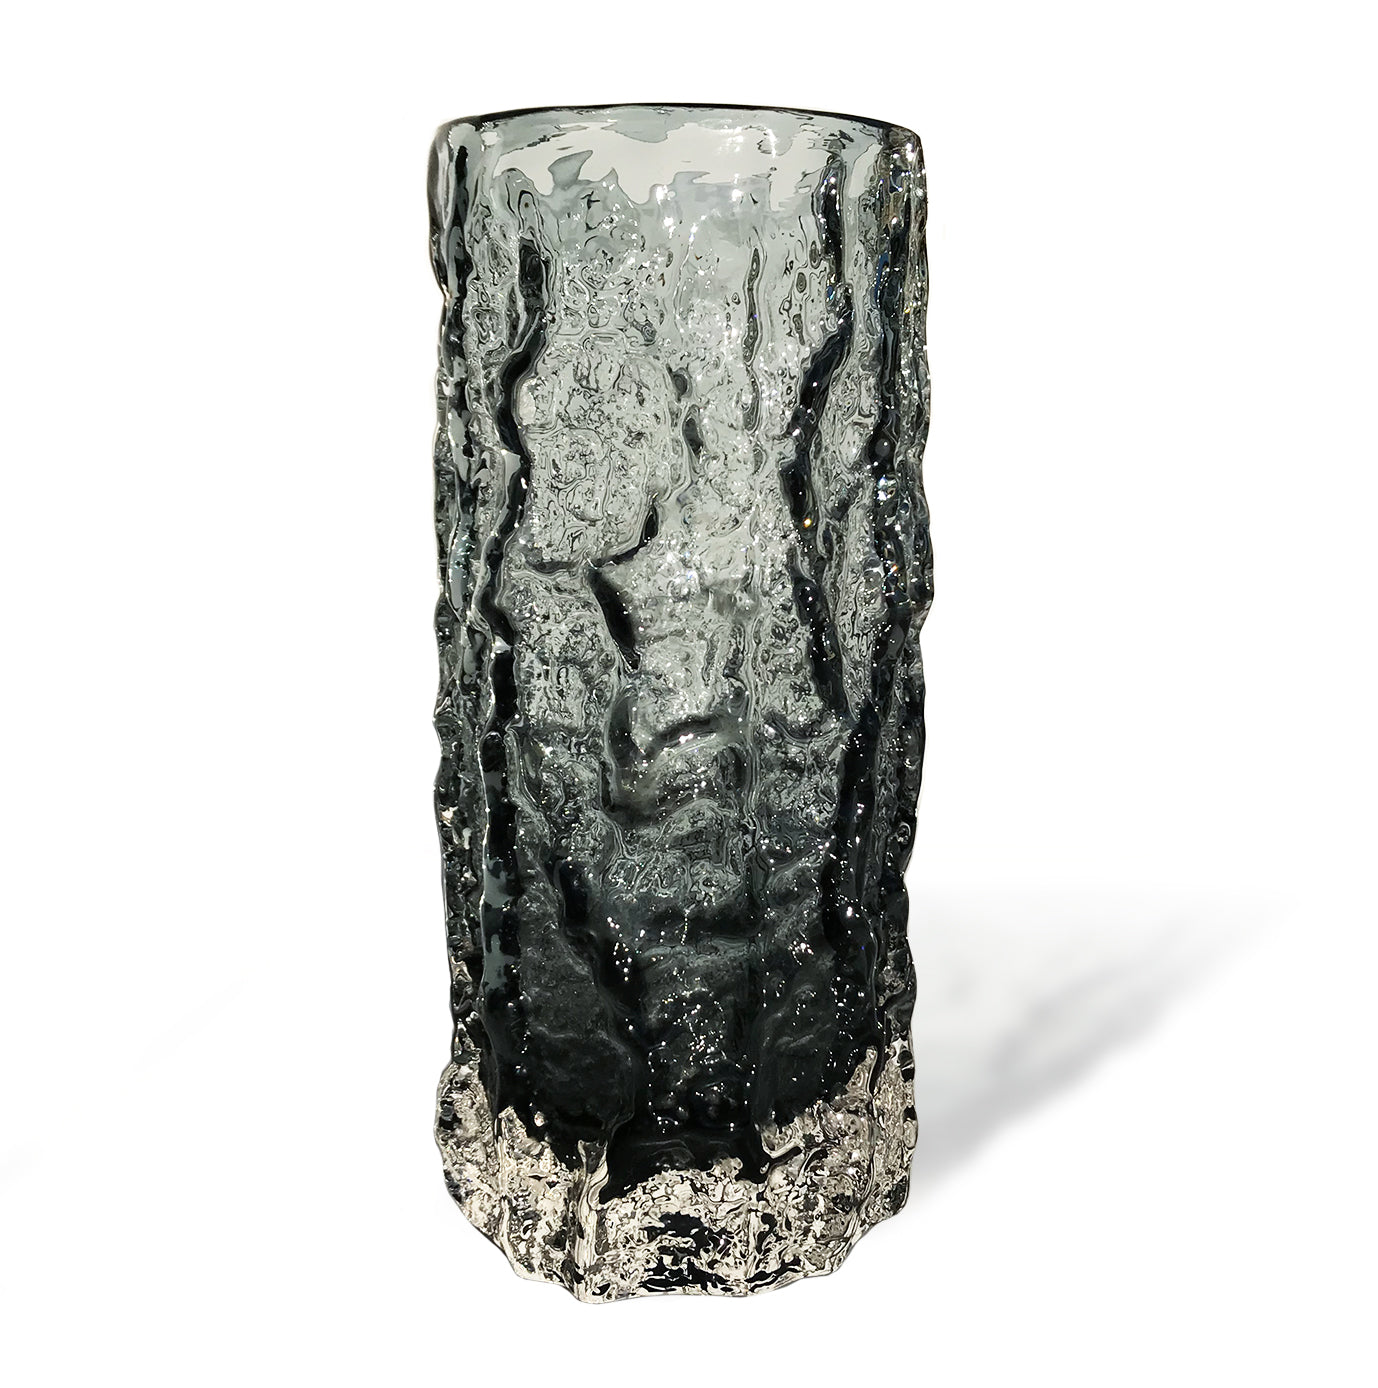 Whitefriars pewter glass cylindrical 7.5" 'Bark' vase, from the 'Textured' range, designed by Geoffrey Baxter - SHOP NOW - www.intovintage.co.uk